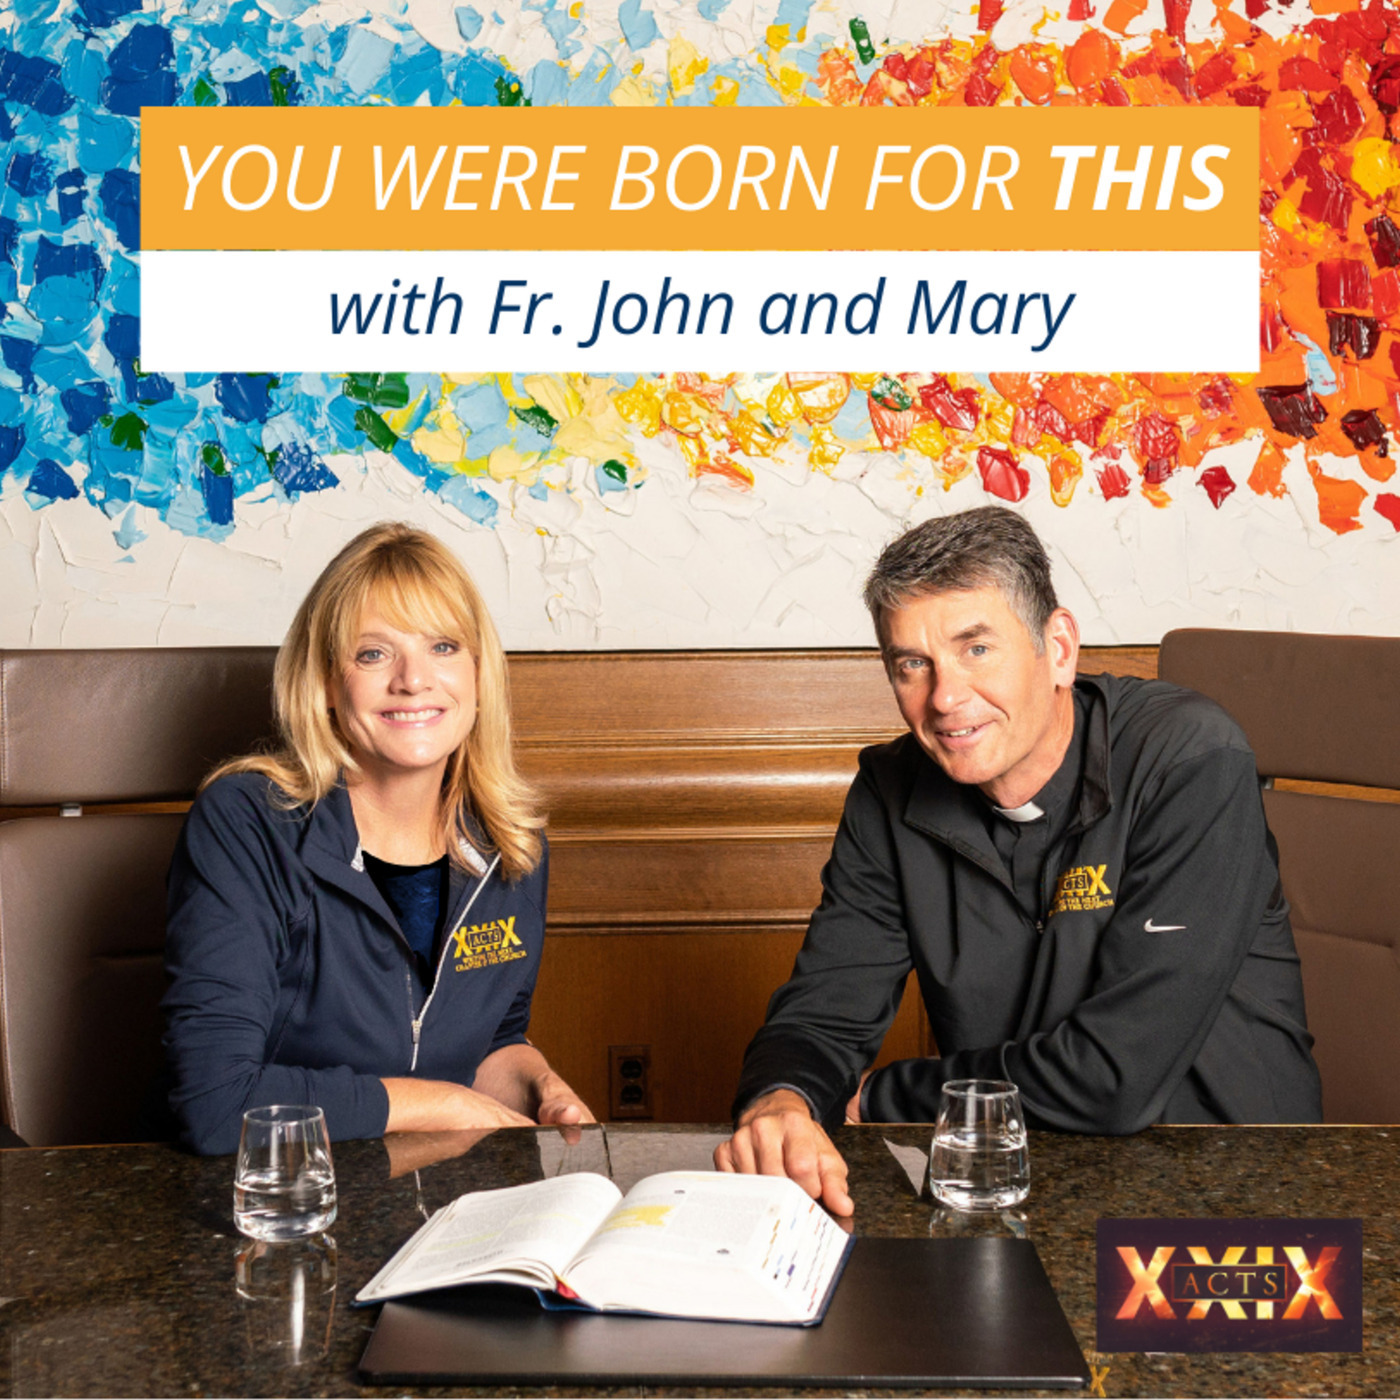 You Were Born for This with Fr. John Riccardo 160: Boot Camp With ACTS XXIX